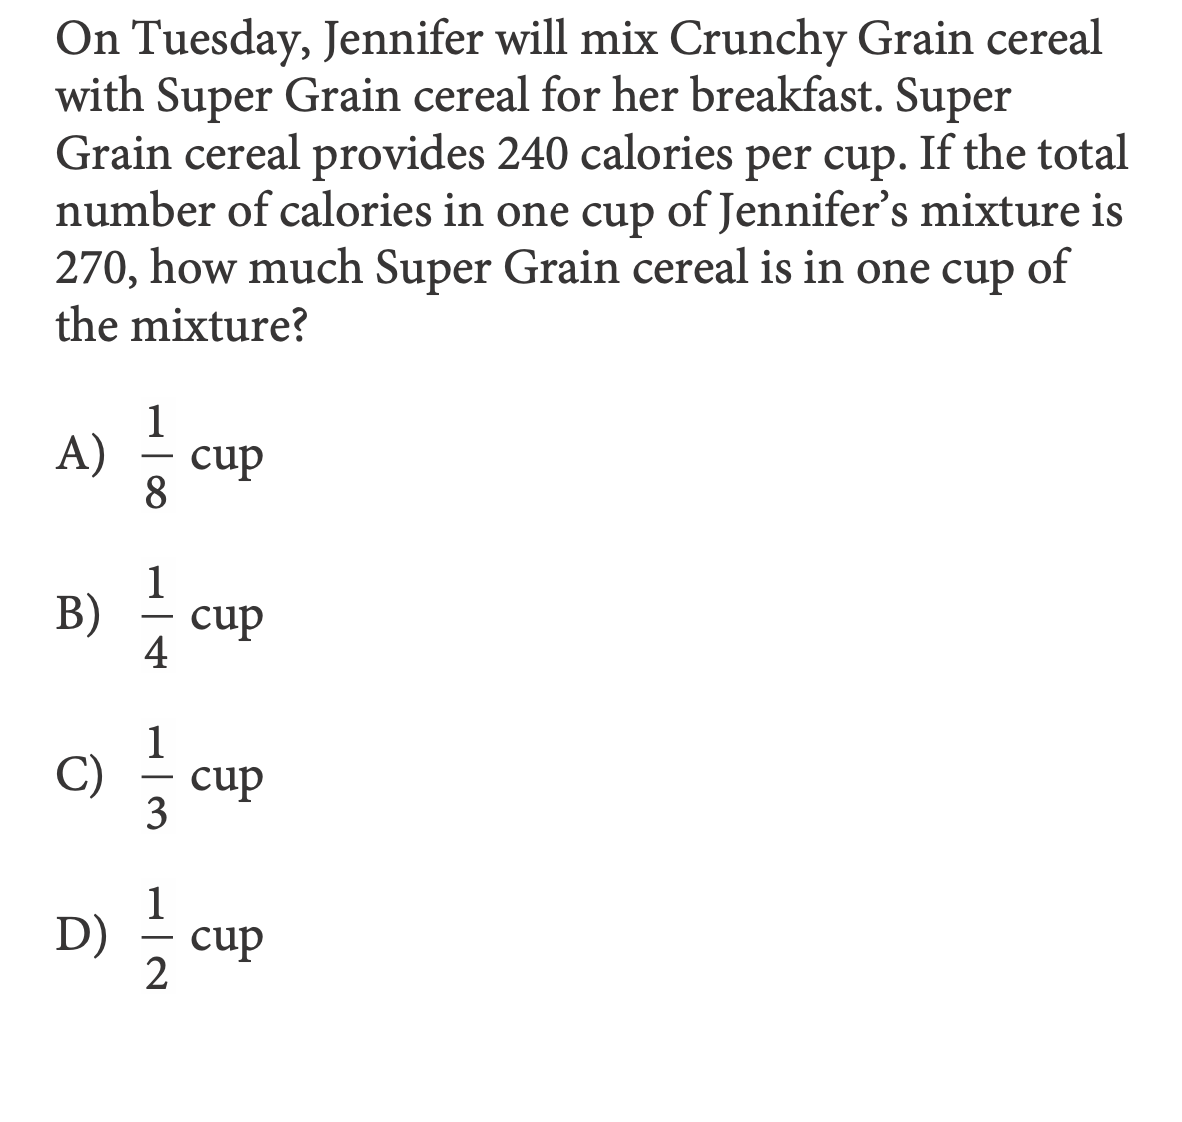 On Tuesday, Jennifer will mix Crunchy Grain cereal
with Super Grain cereal for her breakfast. Super
Grain cereal provides 240 calories per cup. If the total
number of calories in one cup of Jennifer's mixture is
of
270, how much Super Grain cereal is in one cup
the mixture?
1
A)
cup
--
1
B)
cup
-
4
1
C)
cup
-
3
D)
cup
